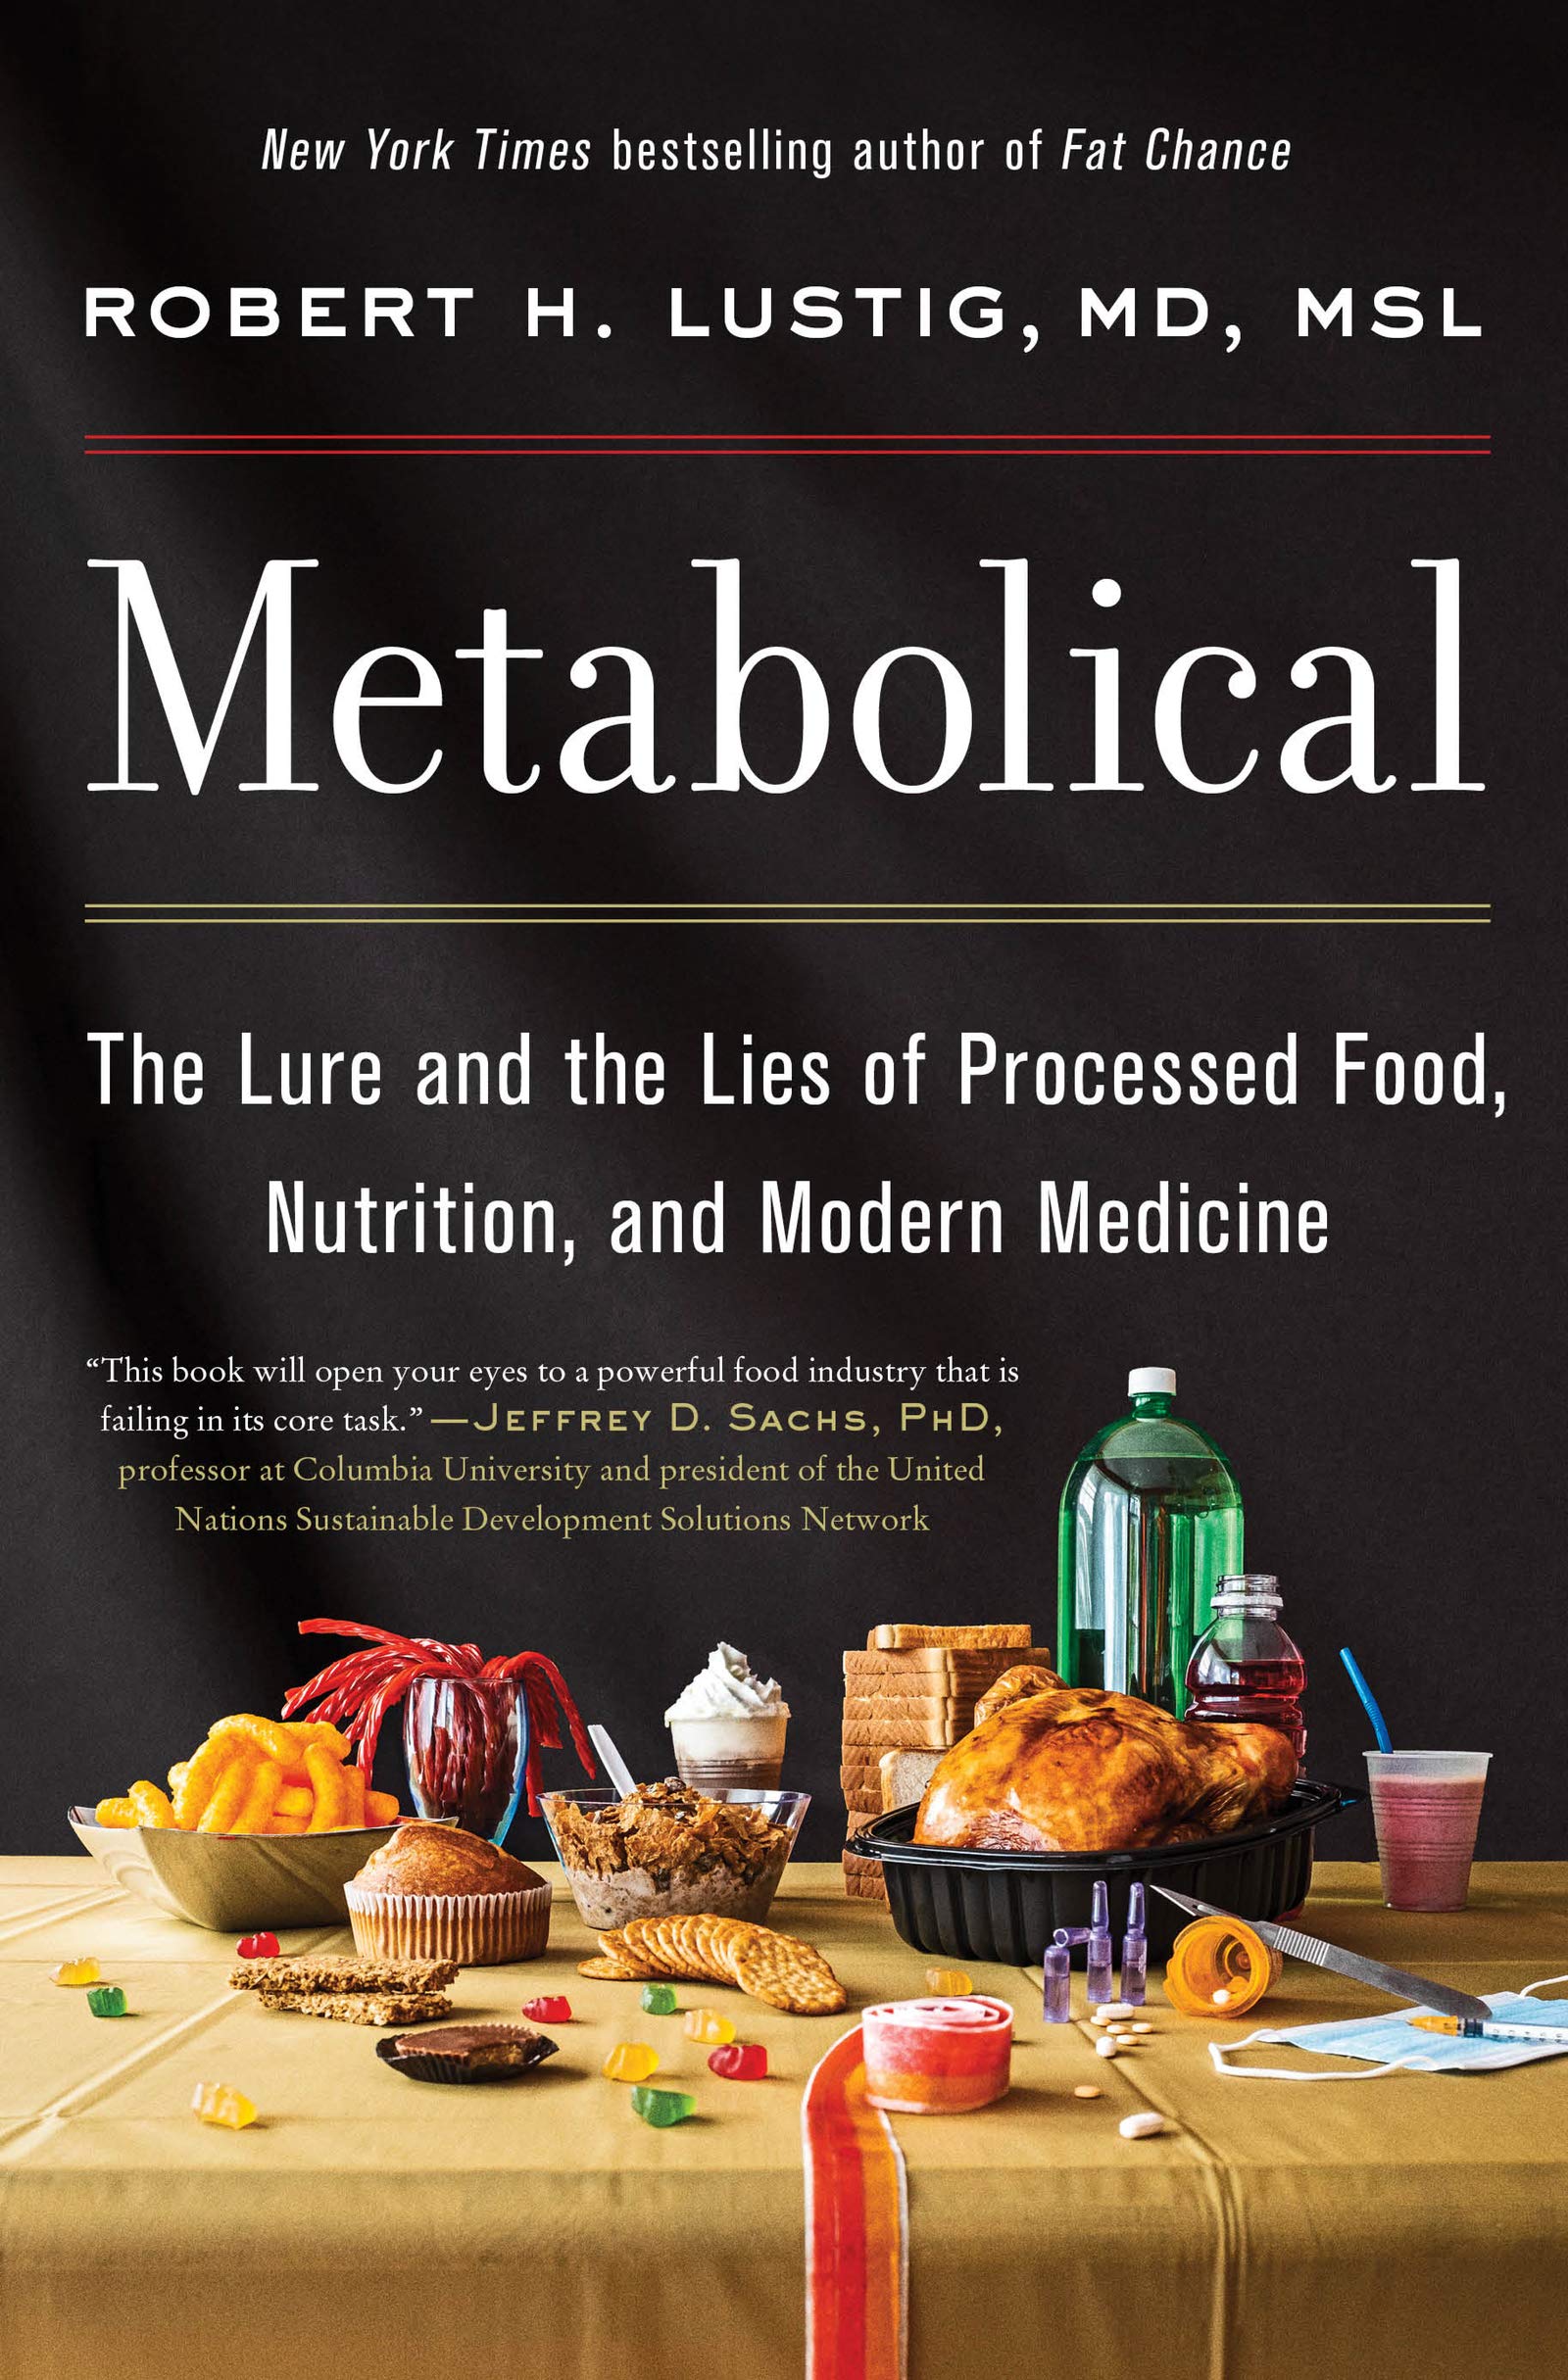 Image for "Metabolical"